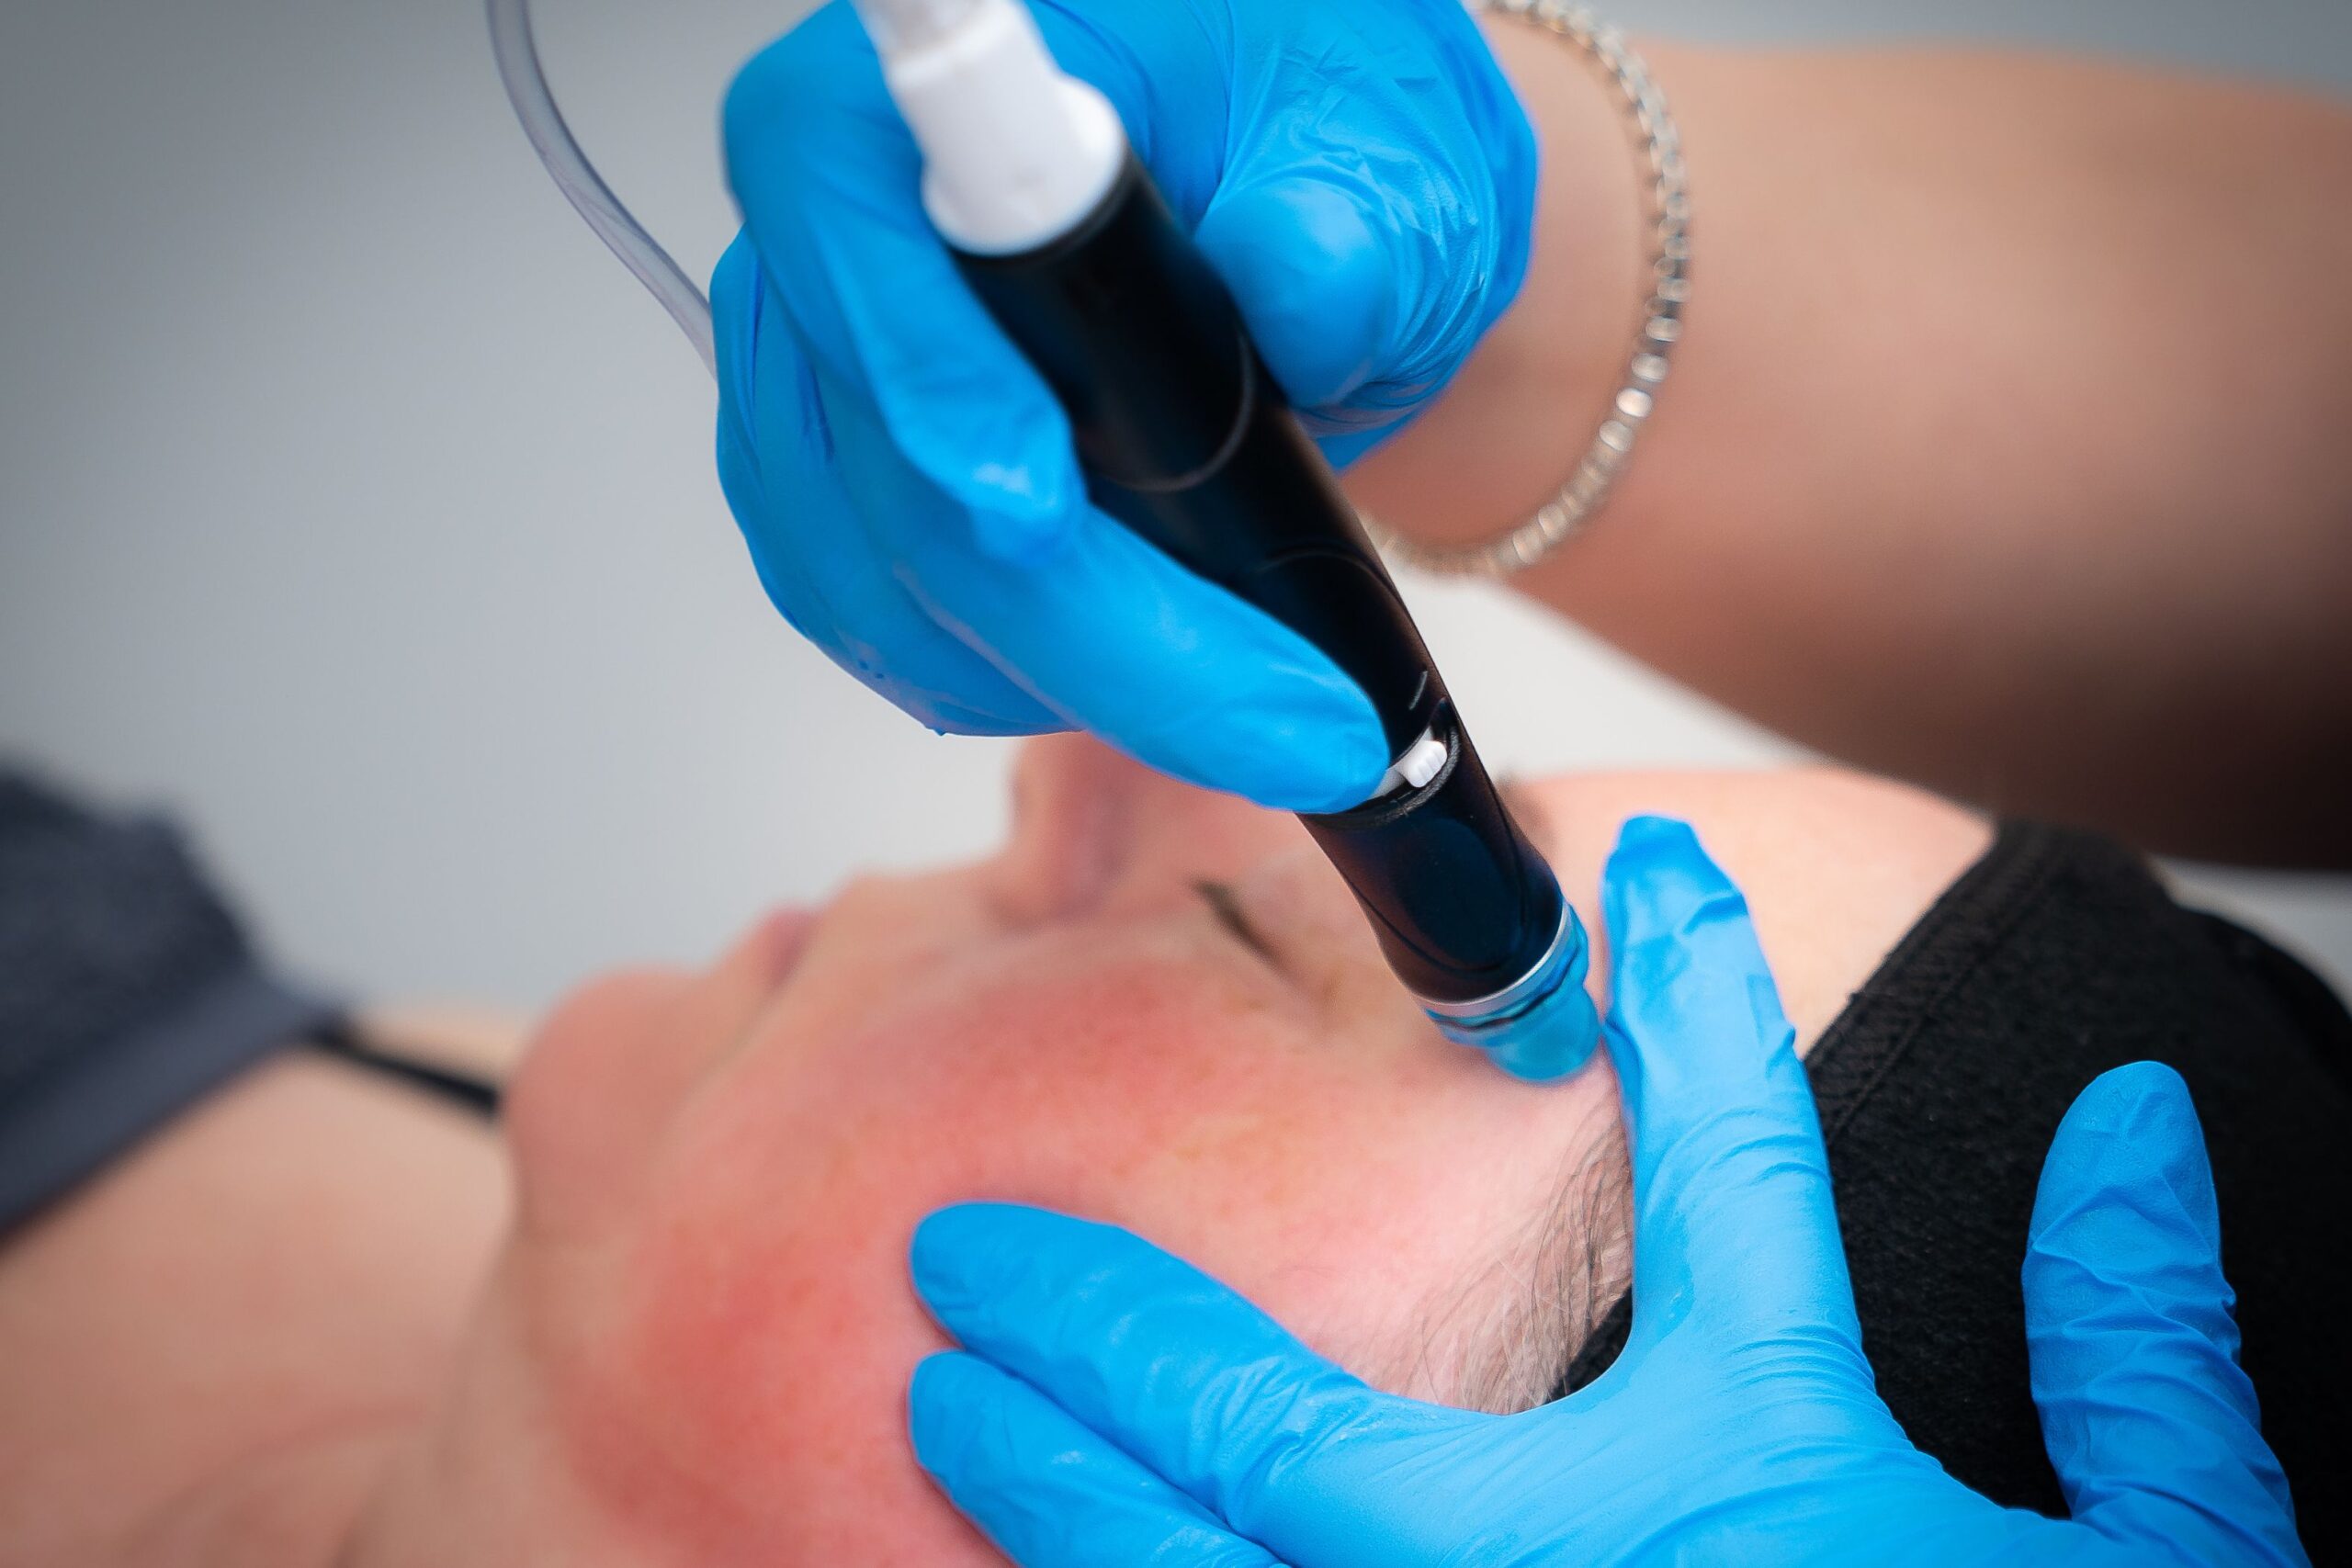 Hydrafacial for enlarged pores at Freyja Medical in Wrexham, Nantwich and Cheshire